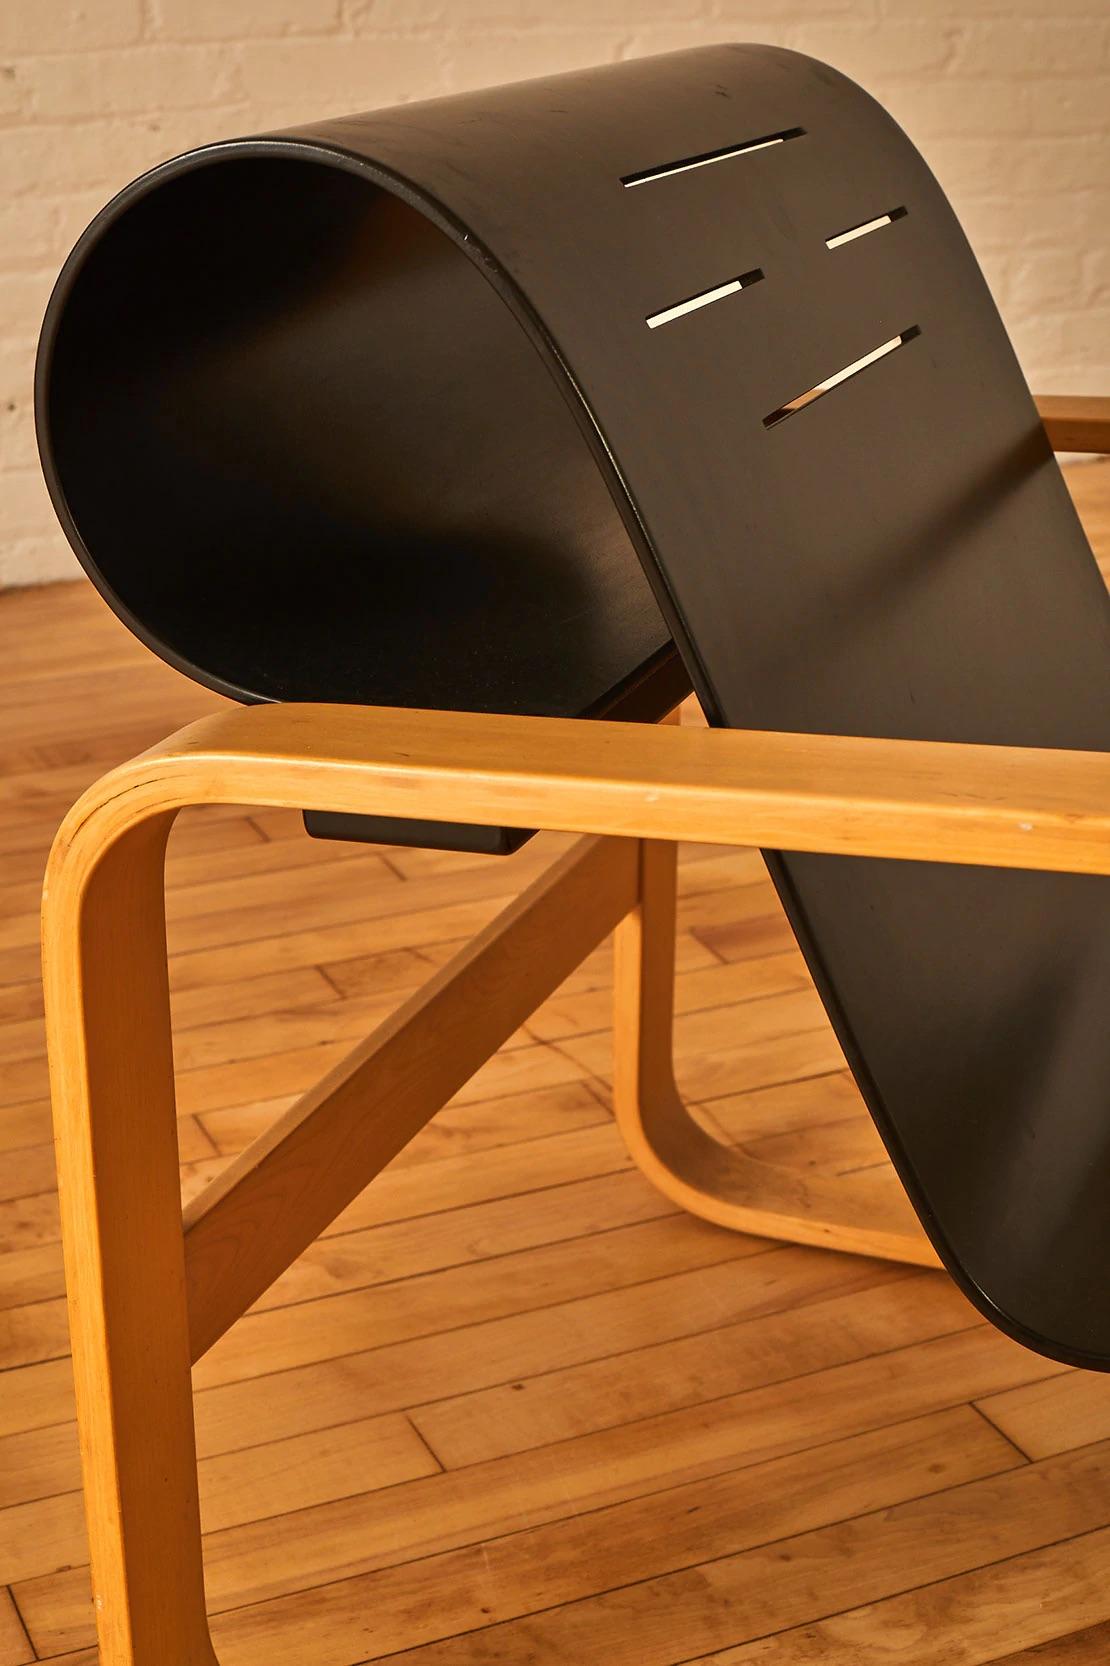 Paimio Chair by Alvar Aalto, an authentic edition, chair #41, designed in 1941 by Alvar Aalto for Artek of Finland. A tour de force in bentwood it tested the limits of plywood manufacturing in the early 1930s. Admired as much for its sculptural